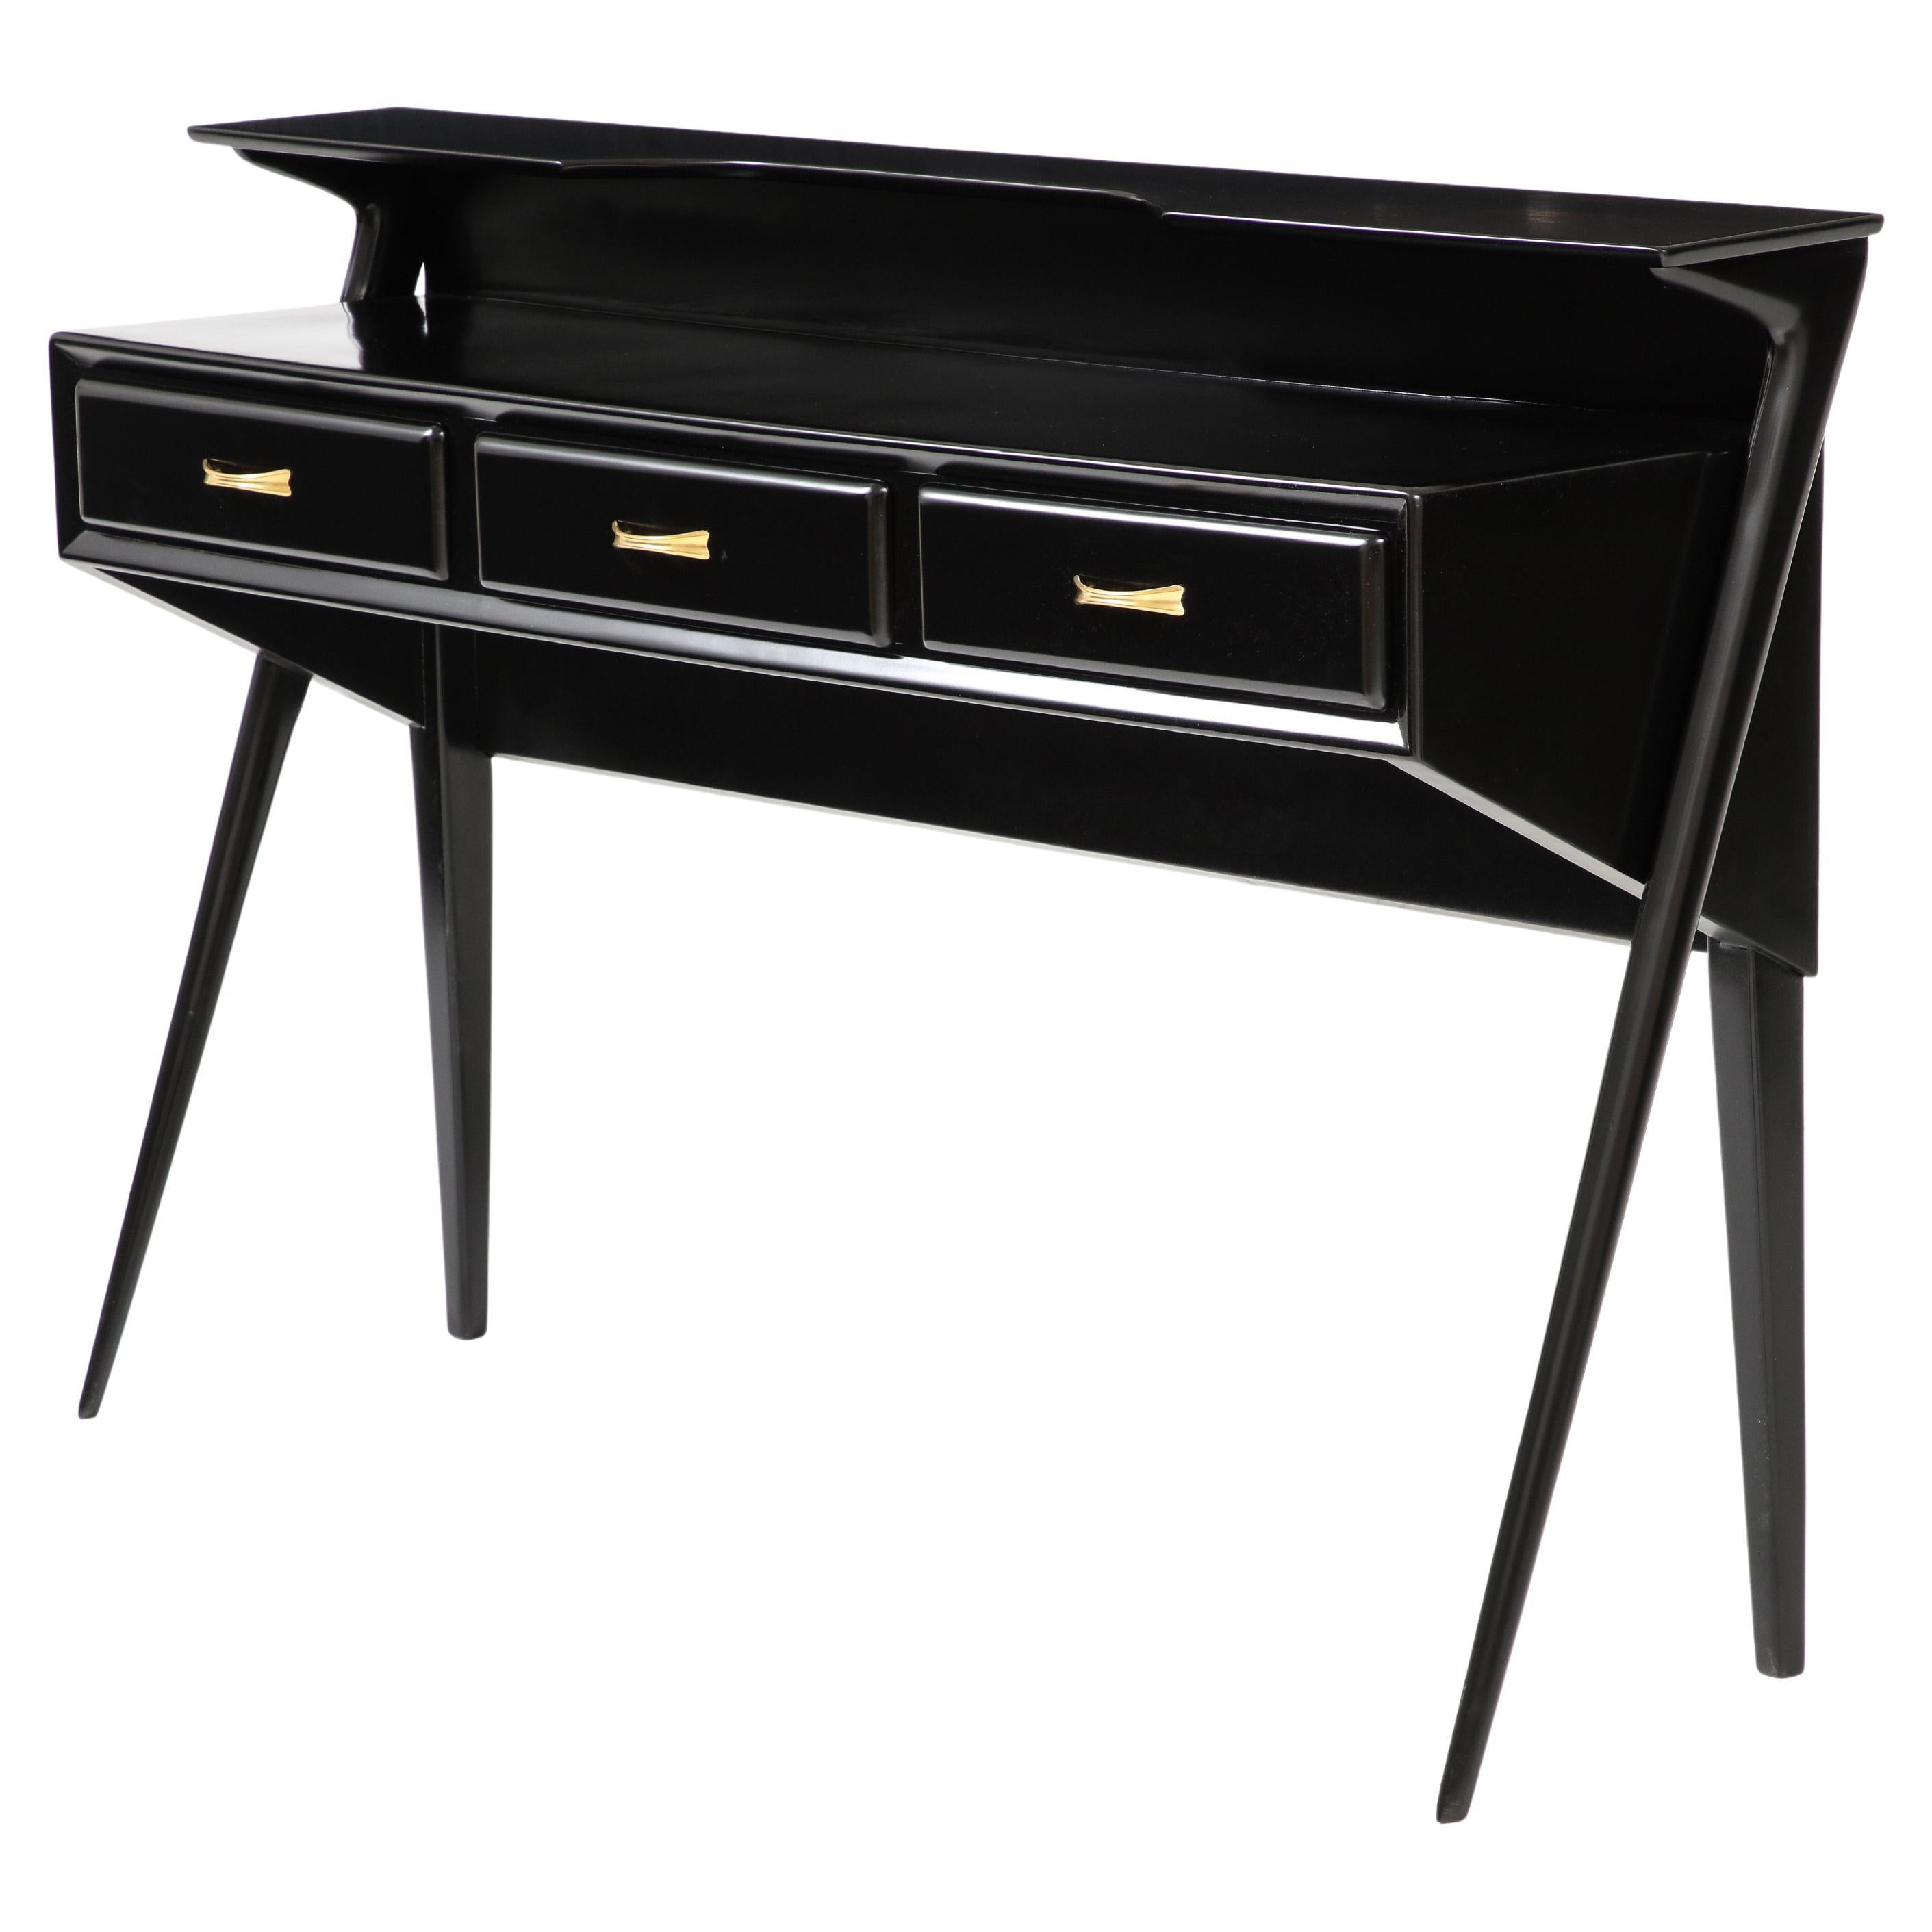 Mid-Century Modern Italian Sculptural Two-Tier Console In Black Lacquer For Sale